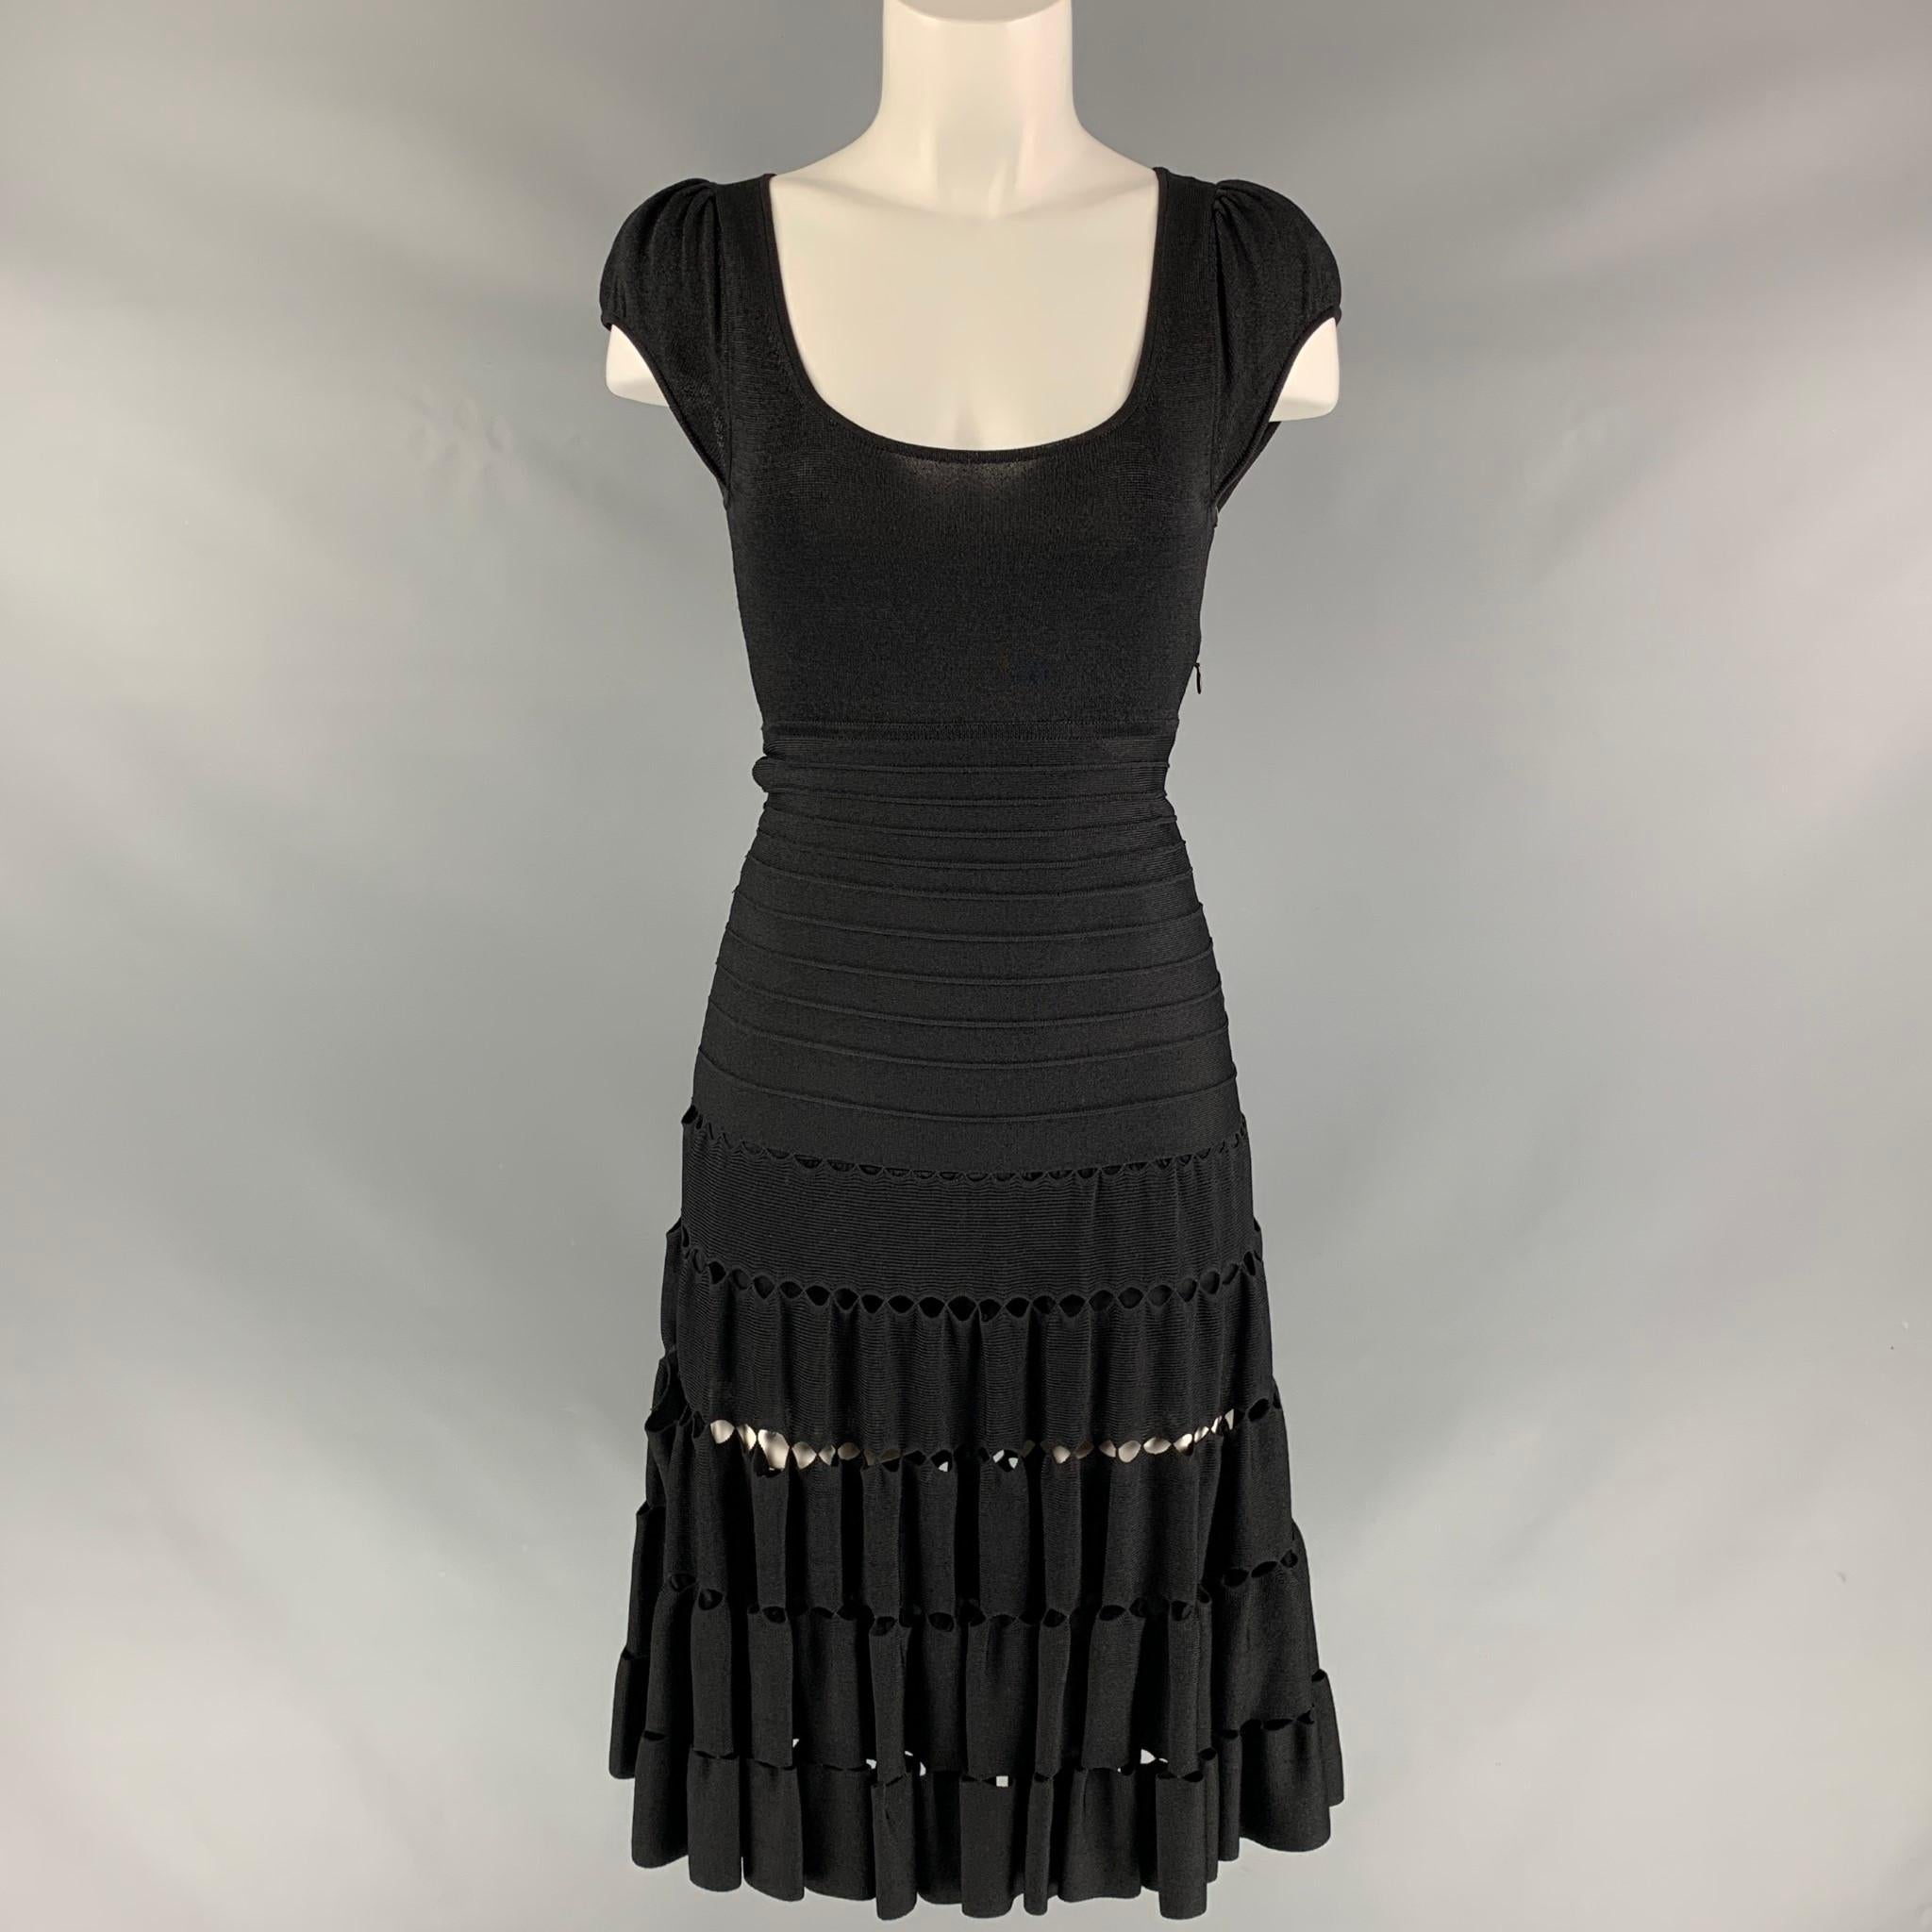 ZAC POSEN short sleeve dropped waist dress comes in black knitted viscose blend fabric, scoop neck and cut out details at the skirt.

Very Good Pre-Owned Condition.
Marked: XS

Measurements:

Shoulder: 13 in
Bust: 30 in
Waist: 24 in
Hip: 28